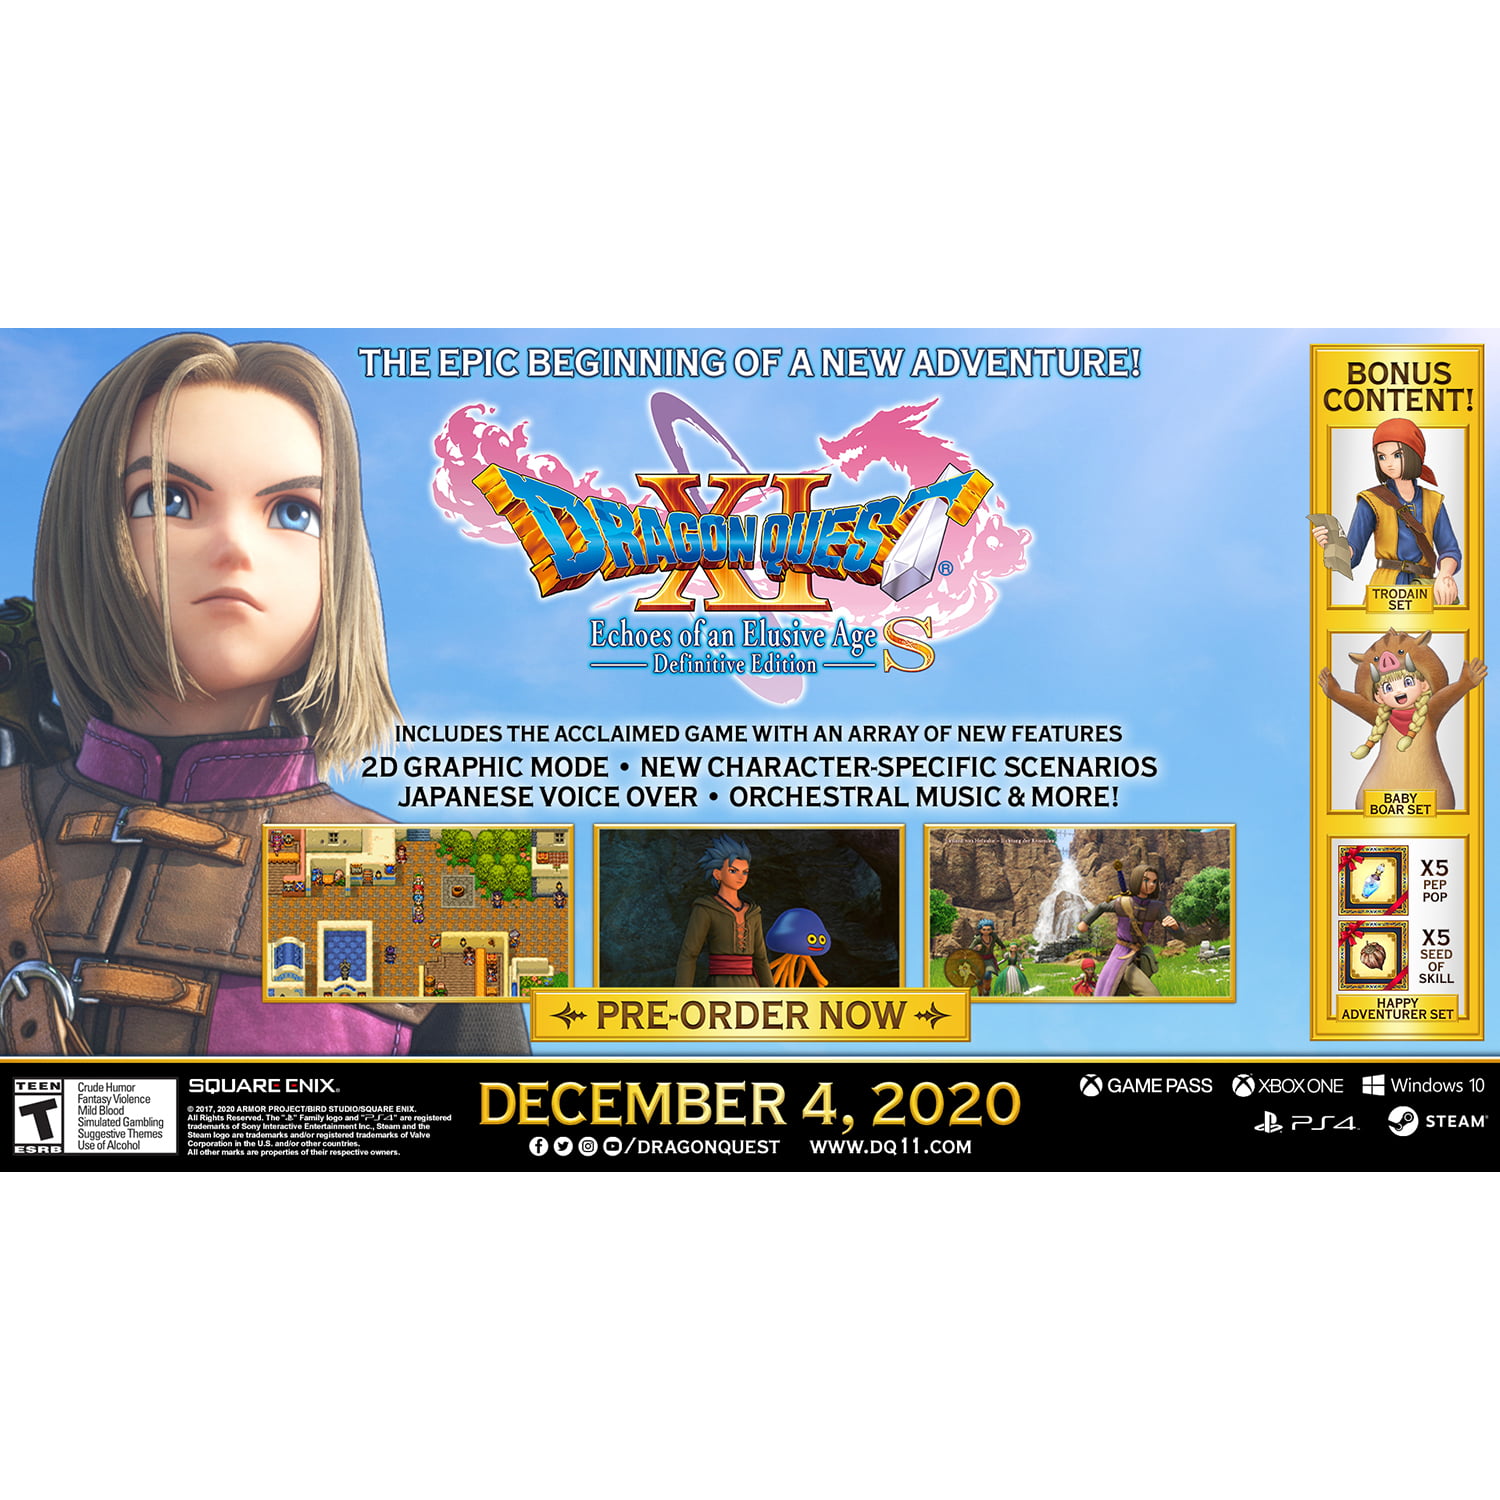 37 My Kingdom for Some Kanaloamari - Quests 31-40 - Quest Catalogue, Dragon Quest XI: Echoes of an Elusive Age Definitive Edition